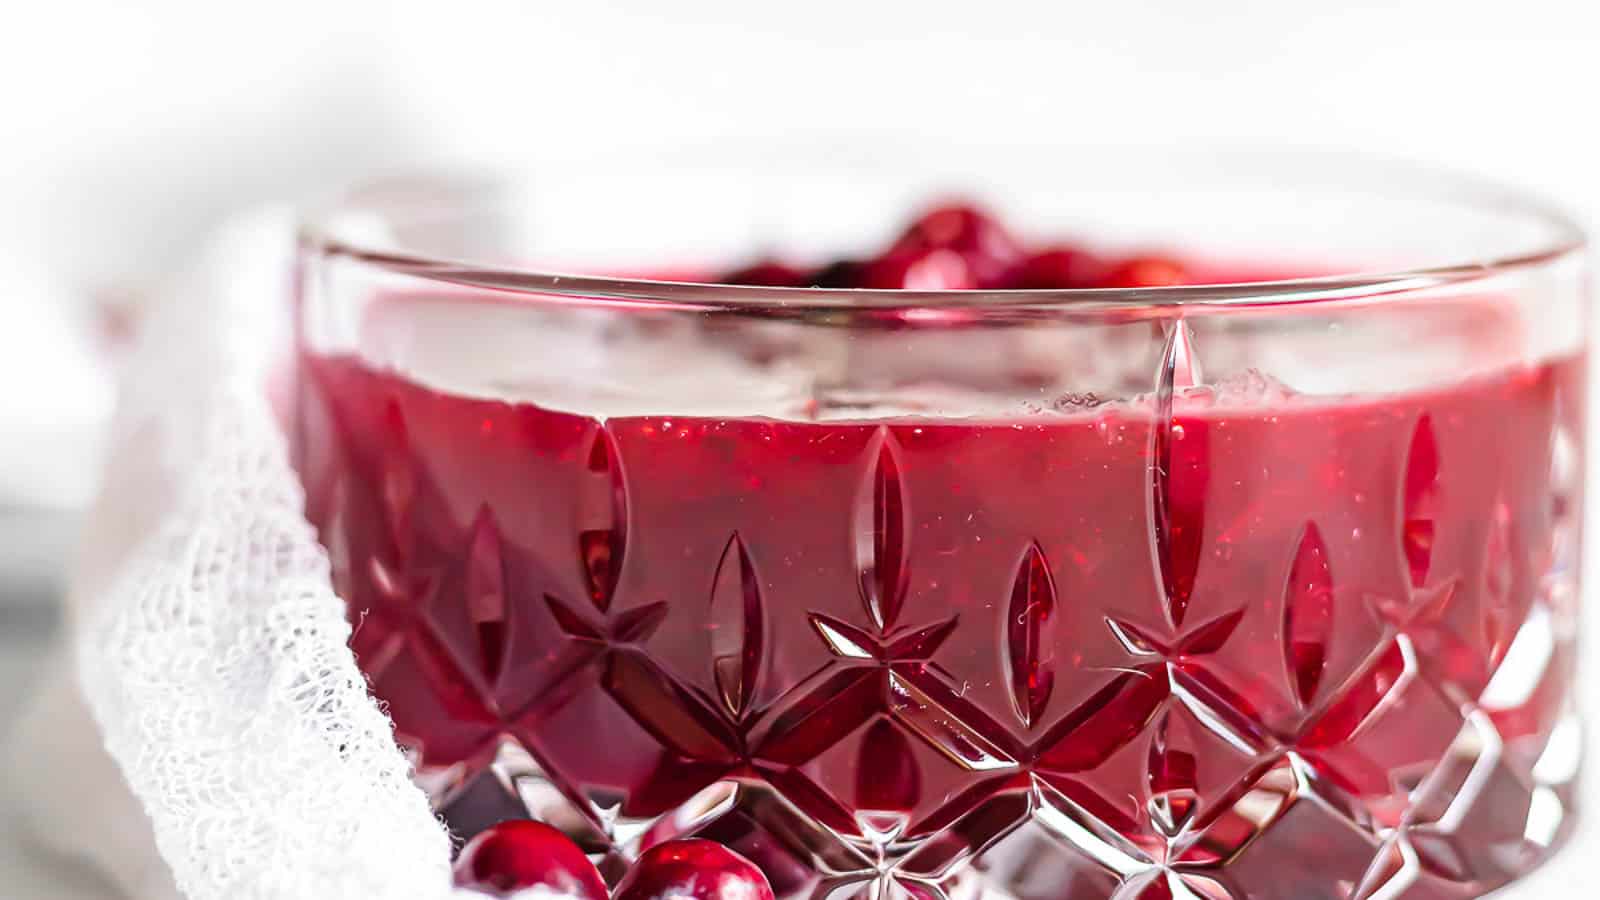 Cranberry sauce in a glass container.